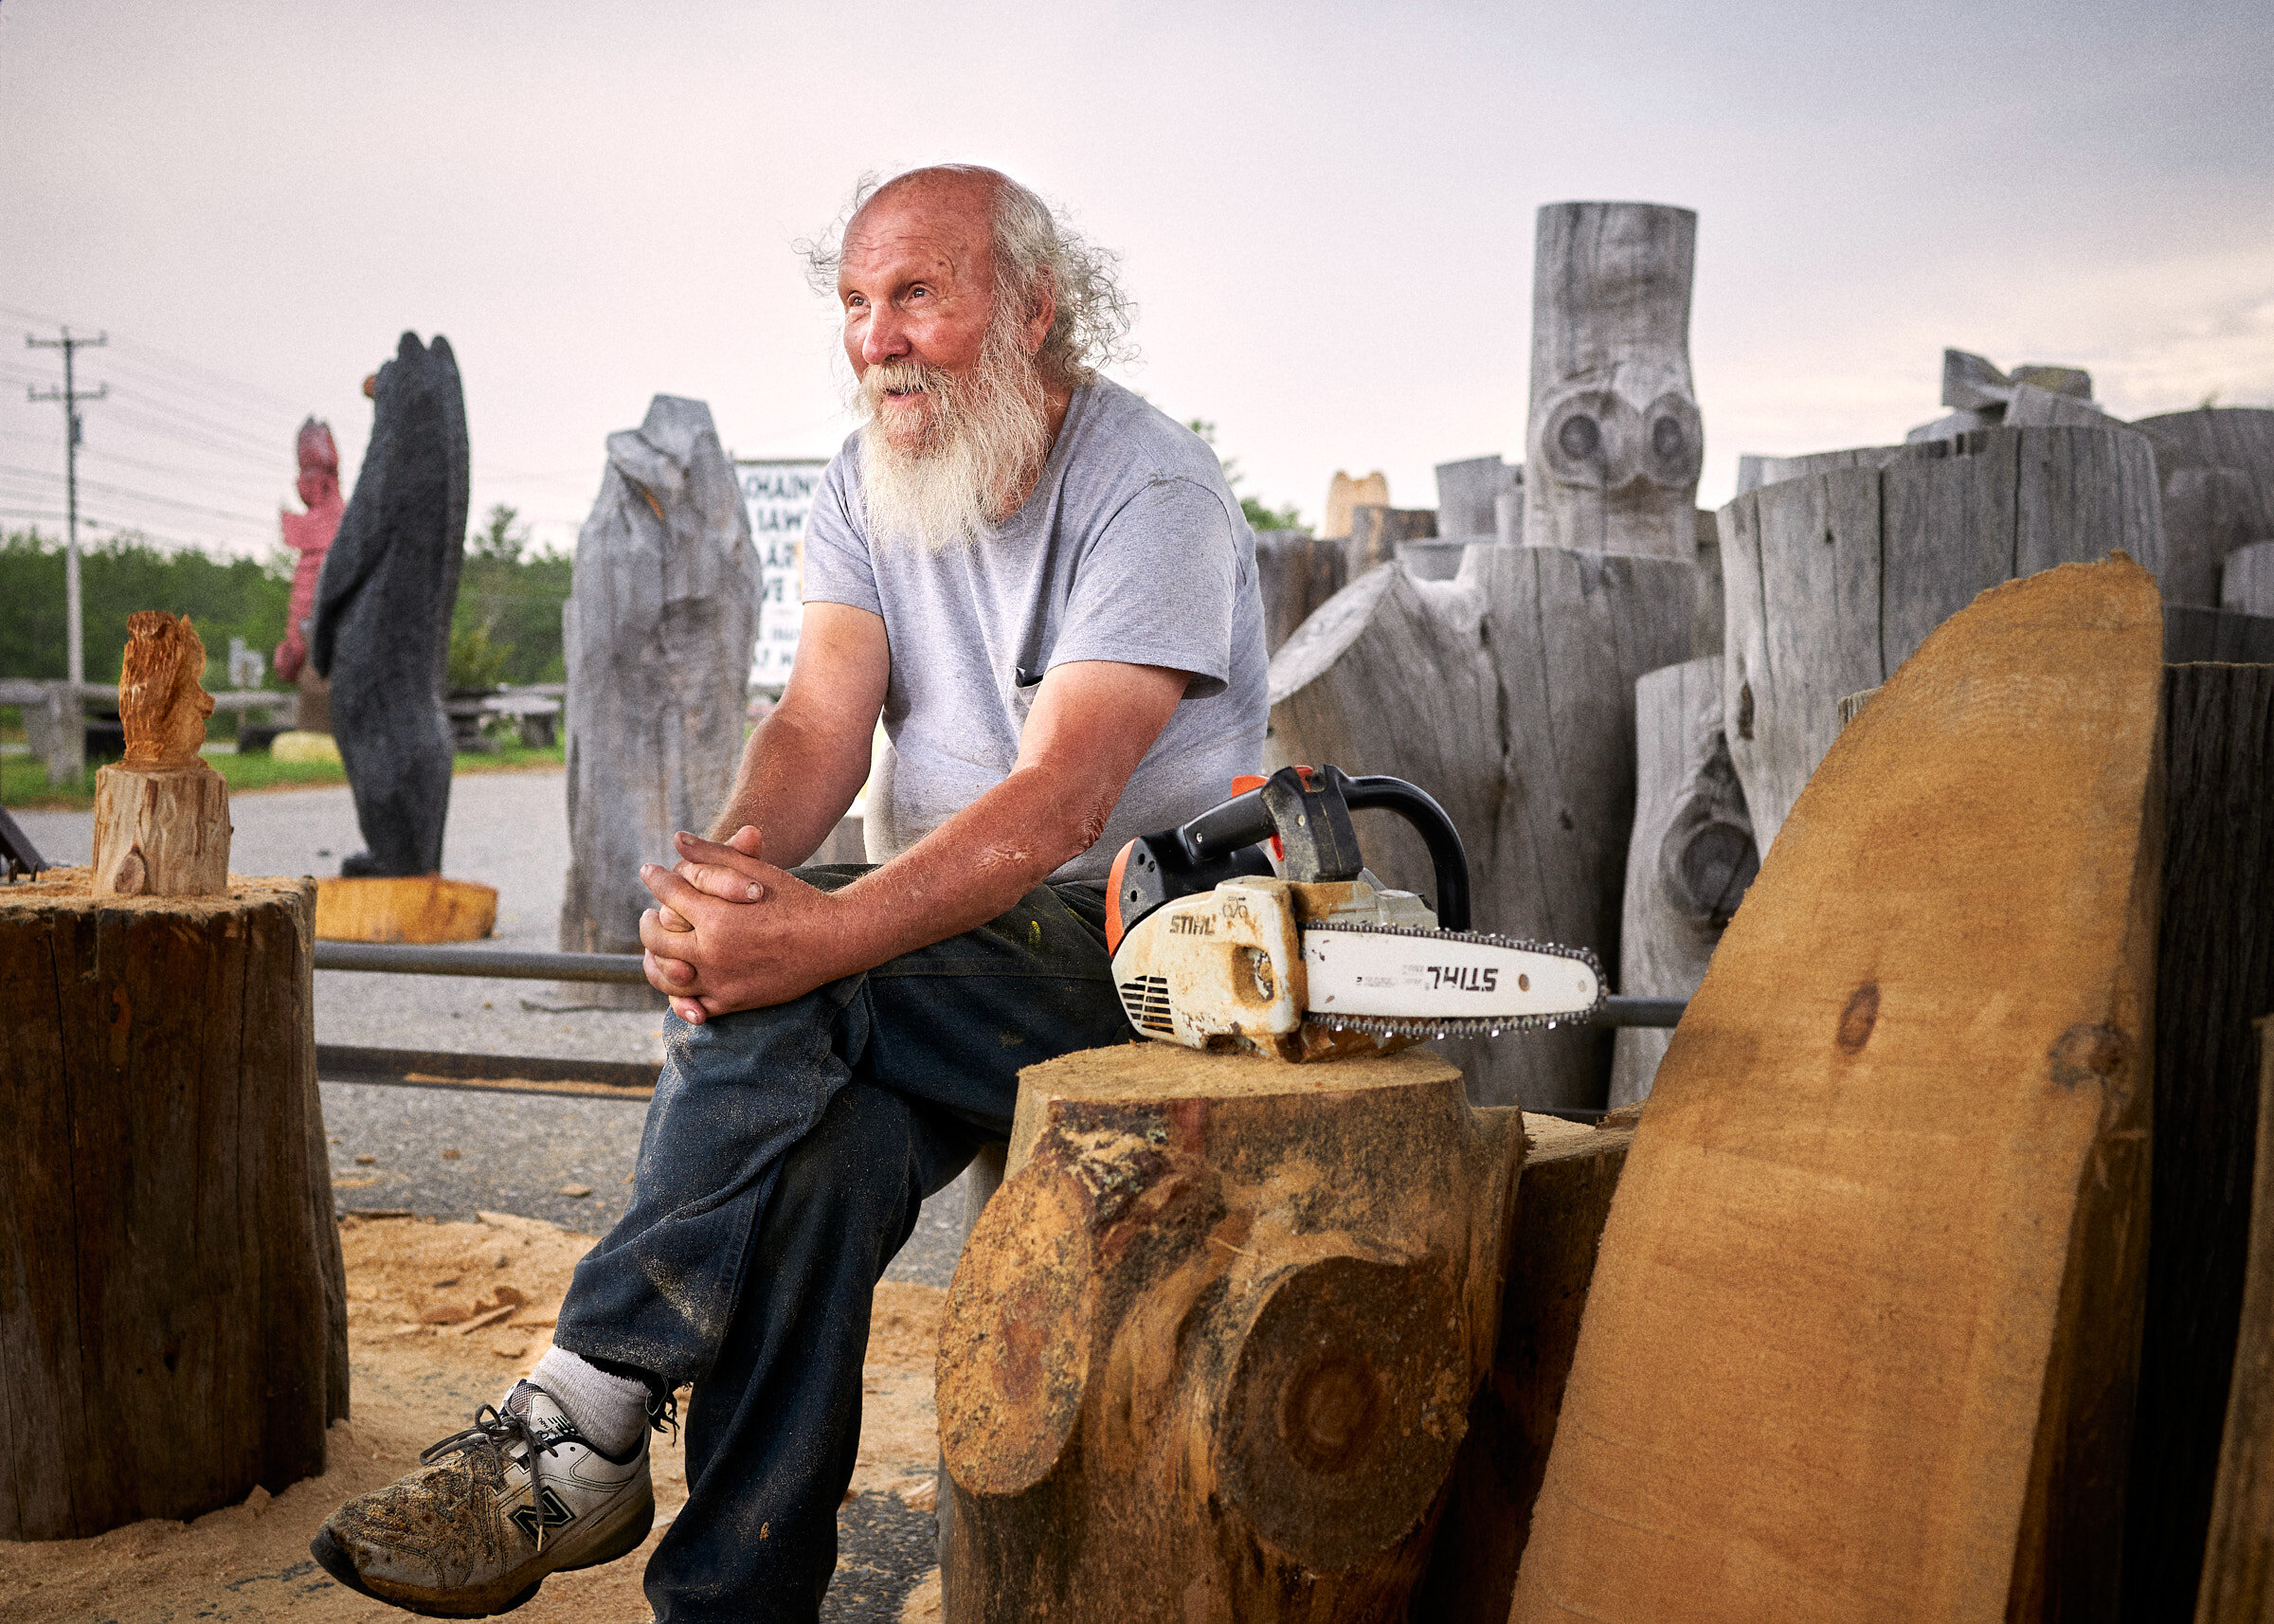  Portrait of Ray Murphy , "The Chainsaw Sawyer Artist" and "The Founder of Chainsaw Art" at his shop in Hancock, Maine. Image © Matthew Rakola 